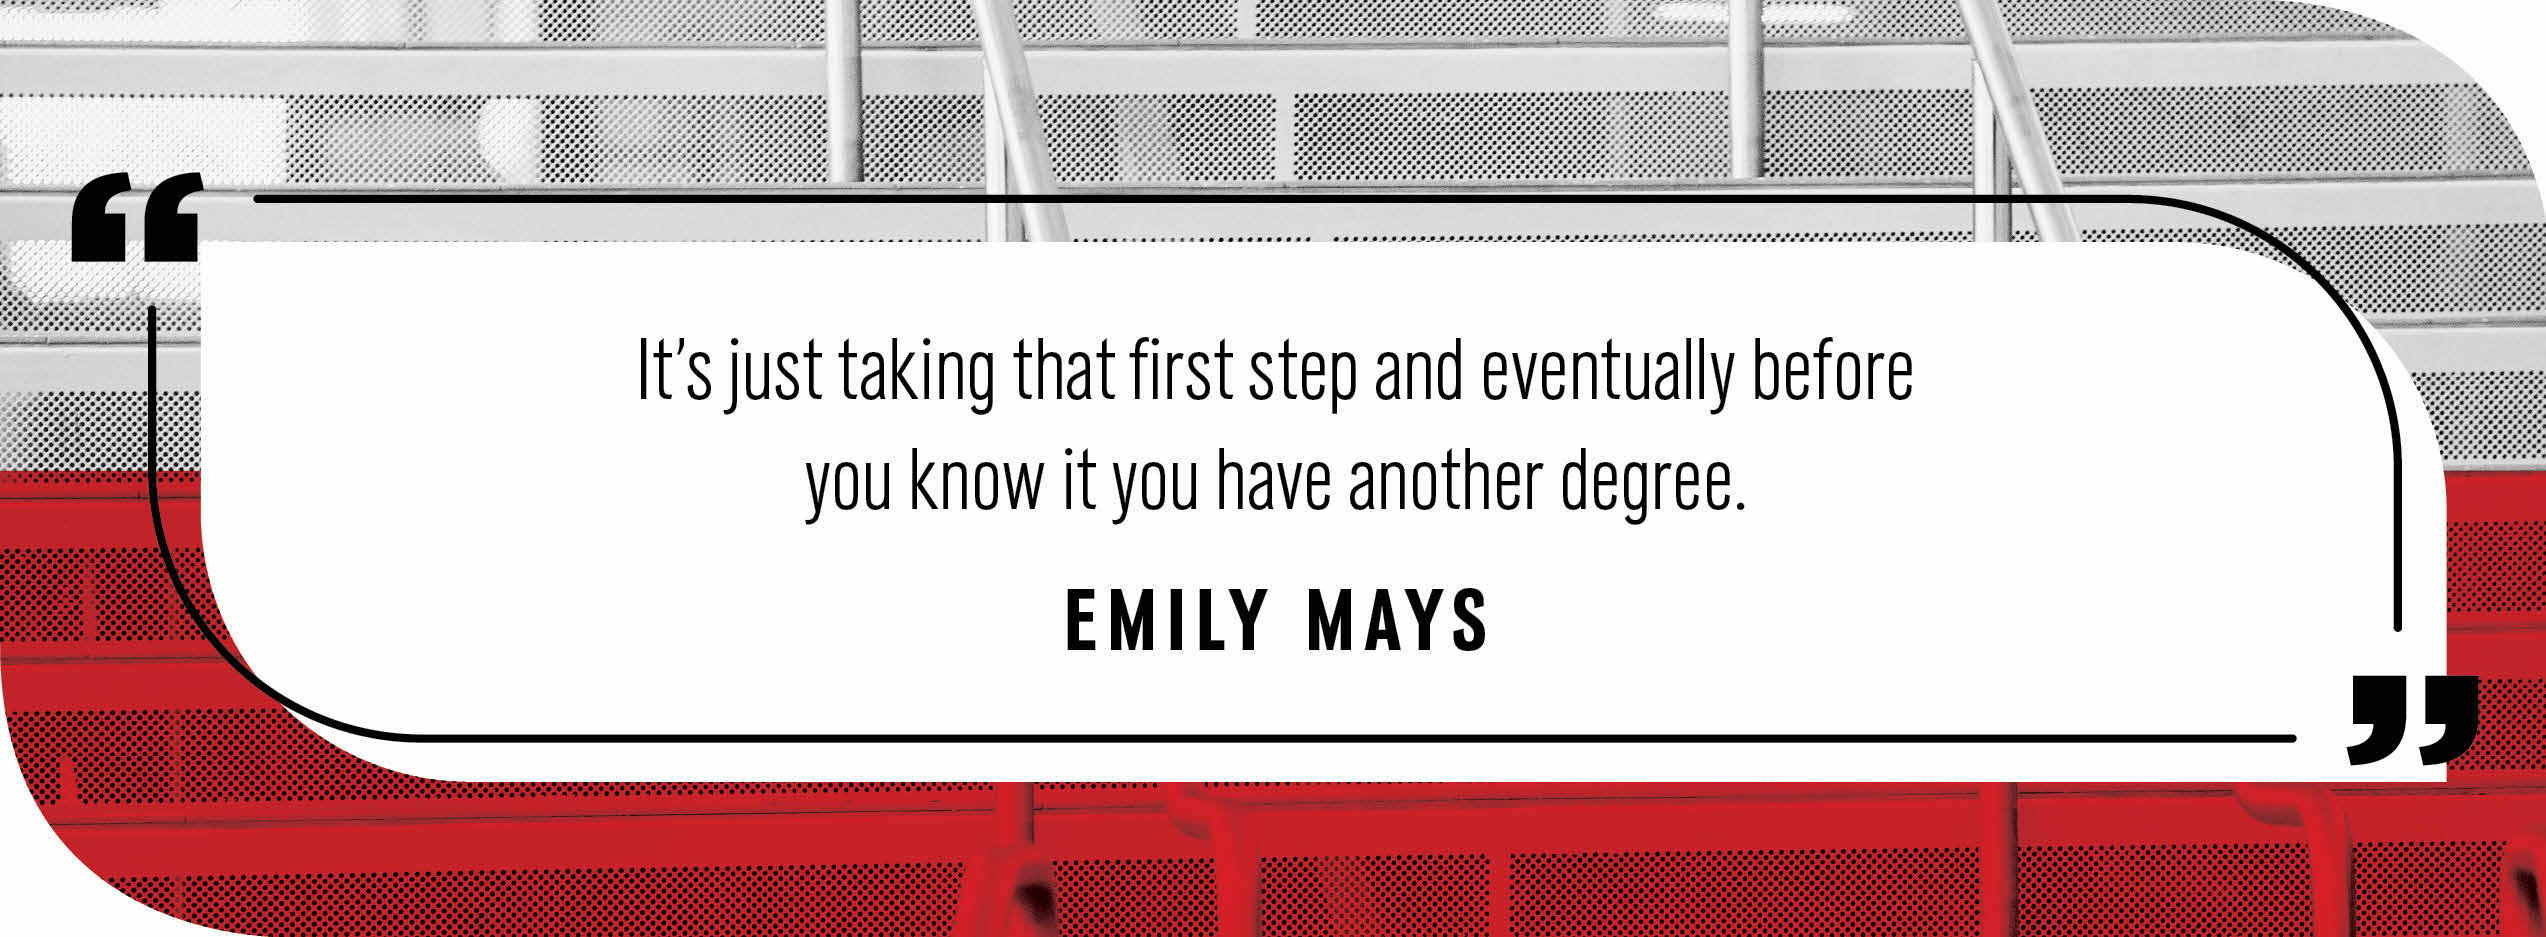 Quote by Emily Mays: "It’s just taking that first step and eventually before you know it you have another degree."